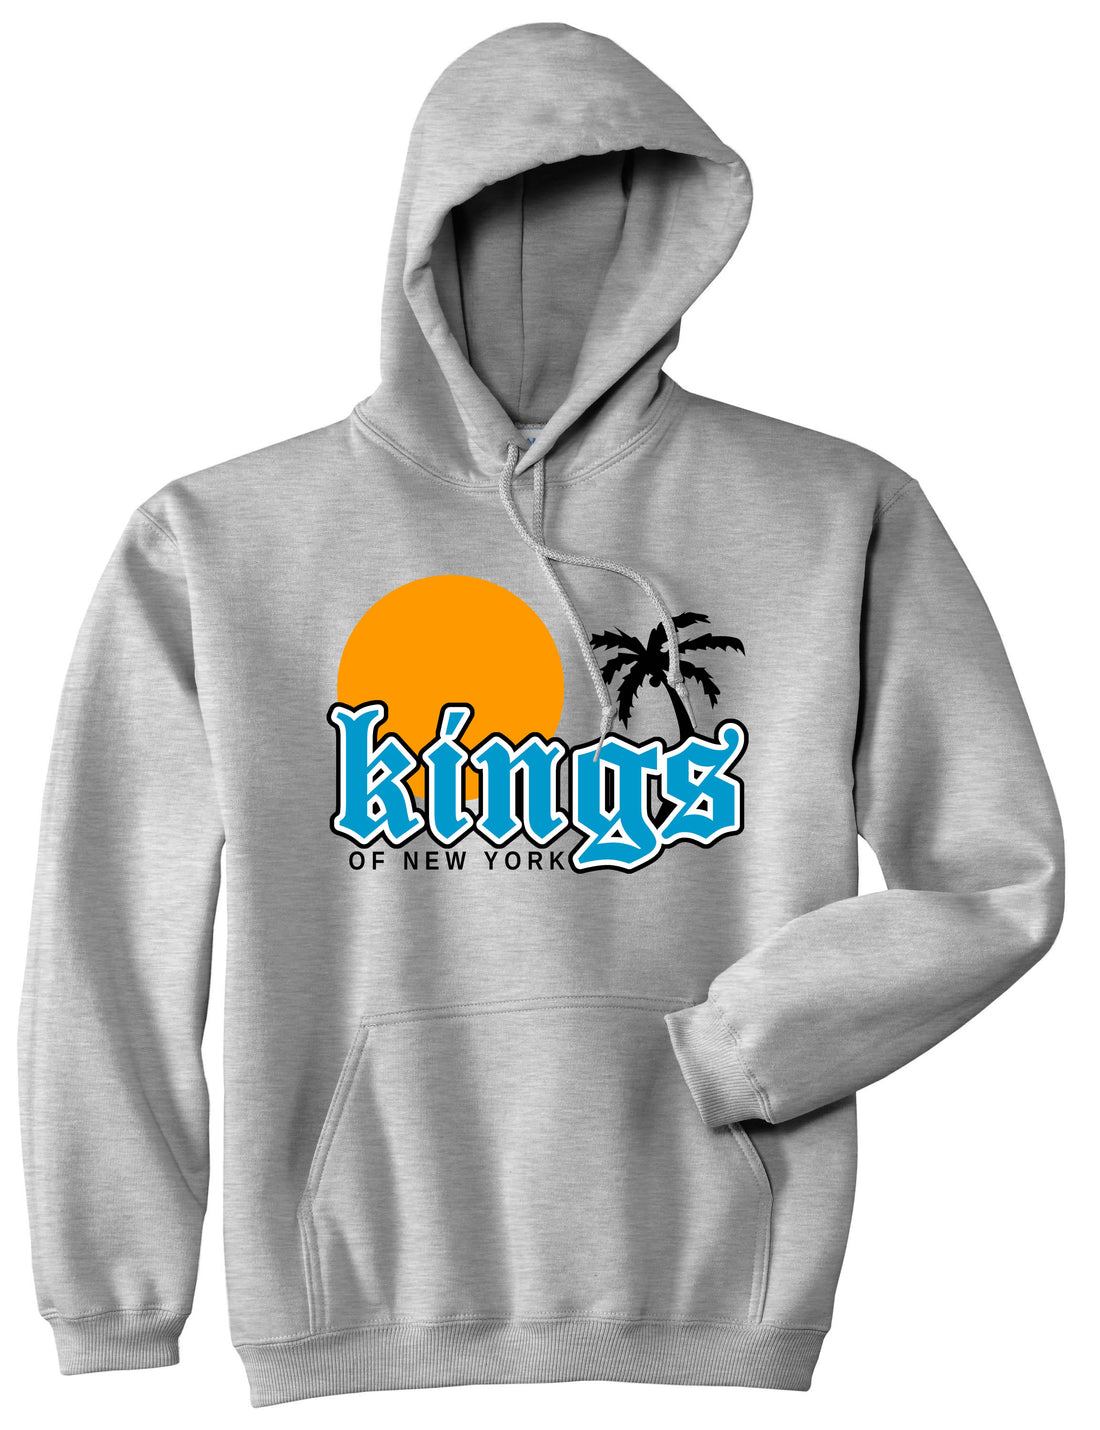 Sunsets And Palm Trees Mens Pullover Hoodie Sweatshirt Grey